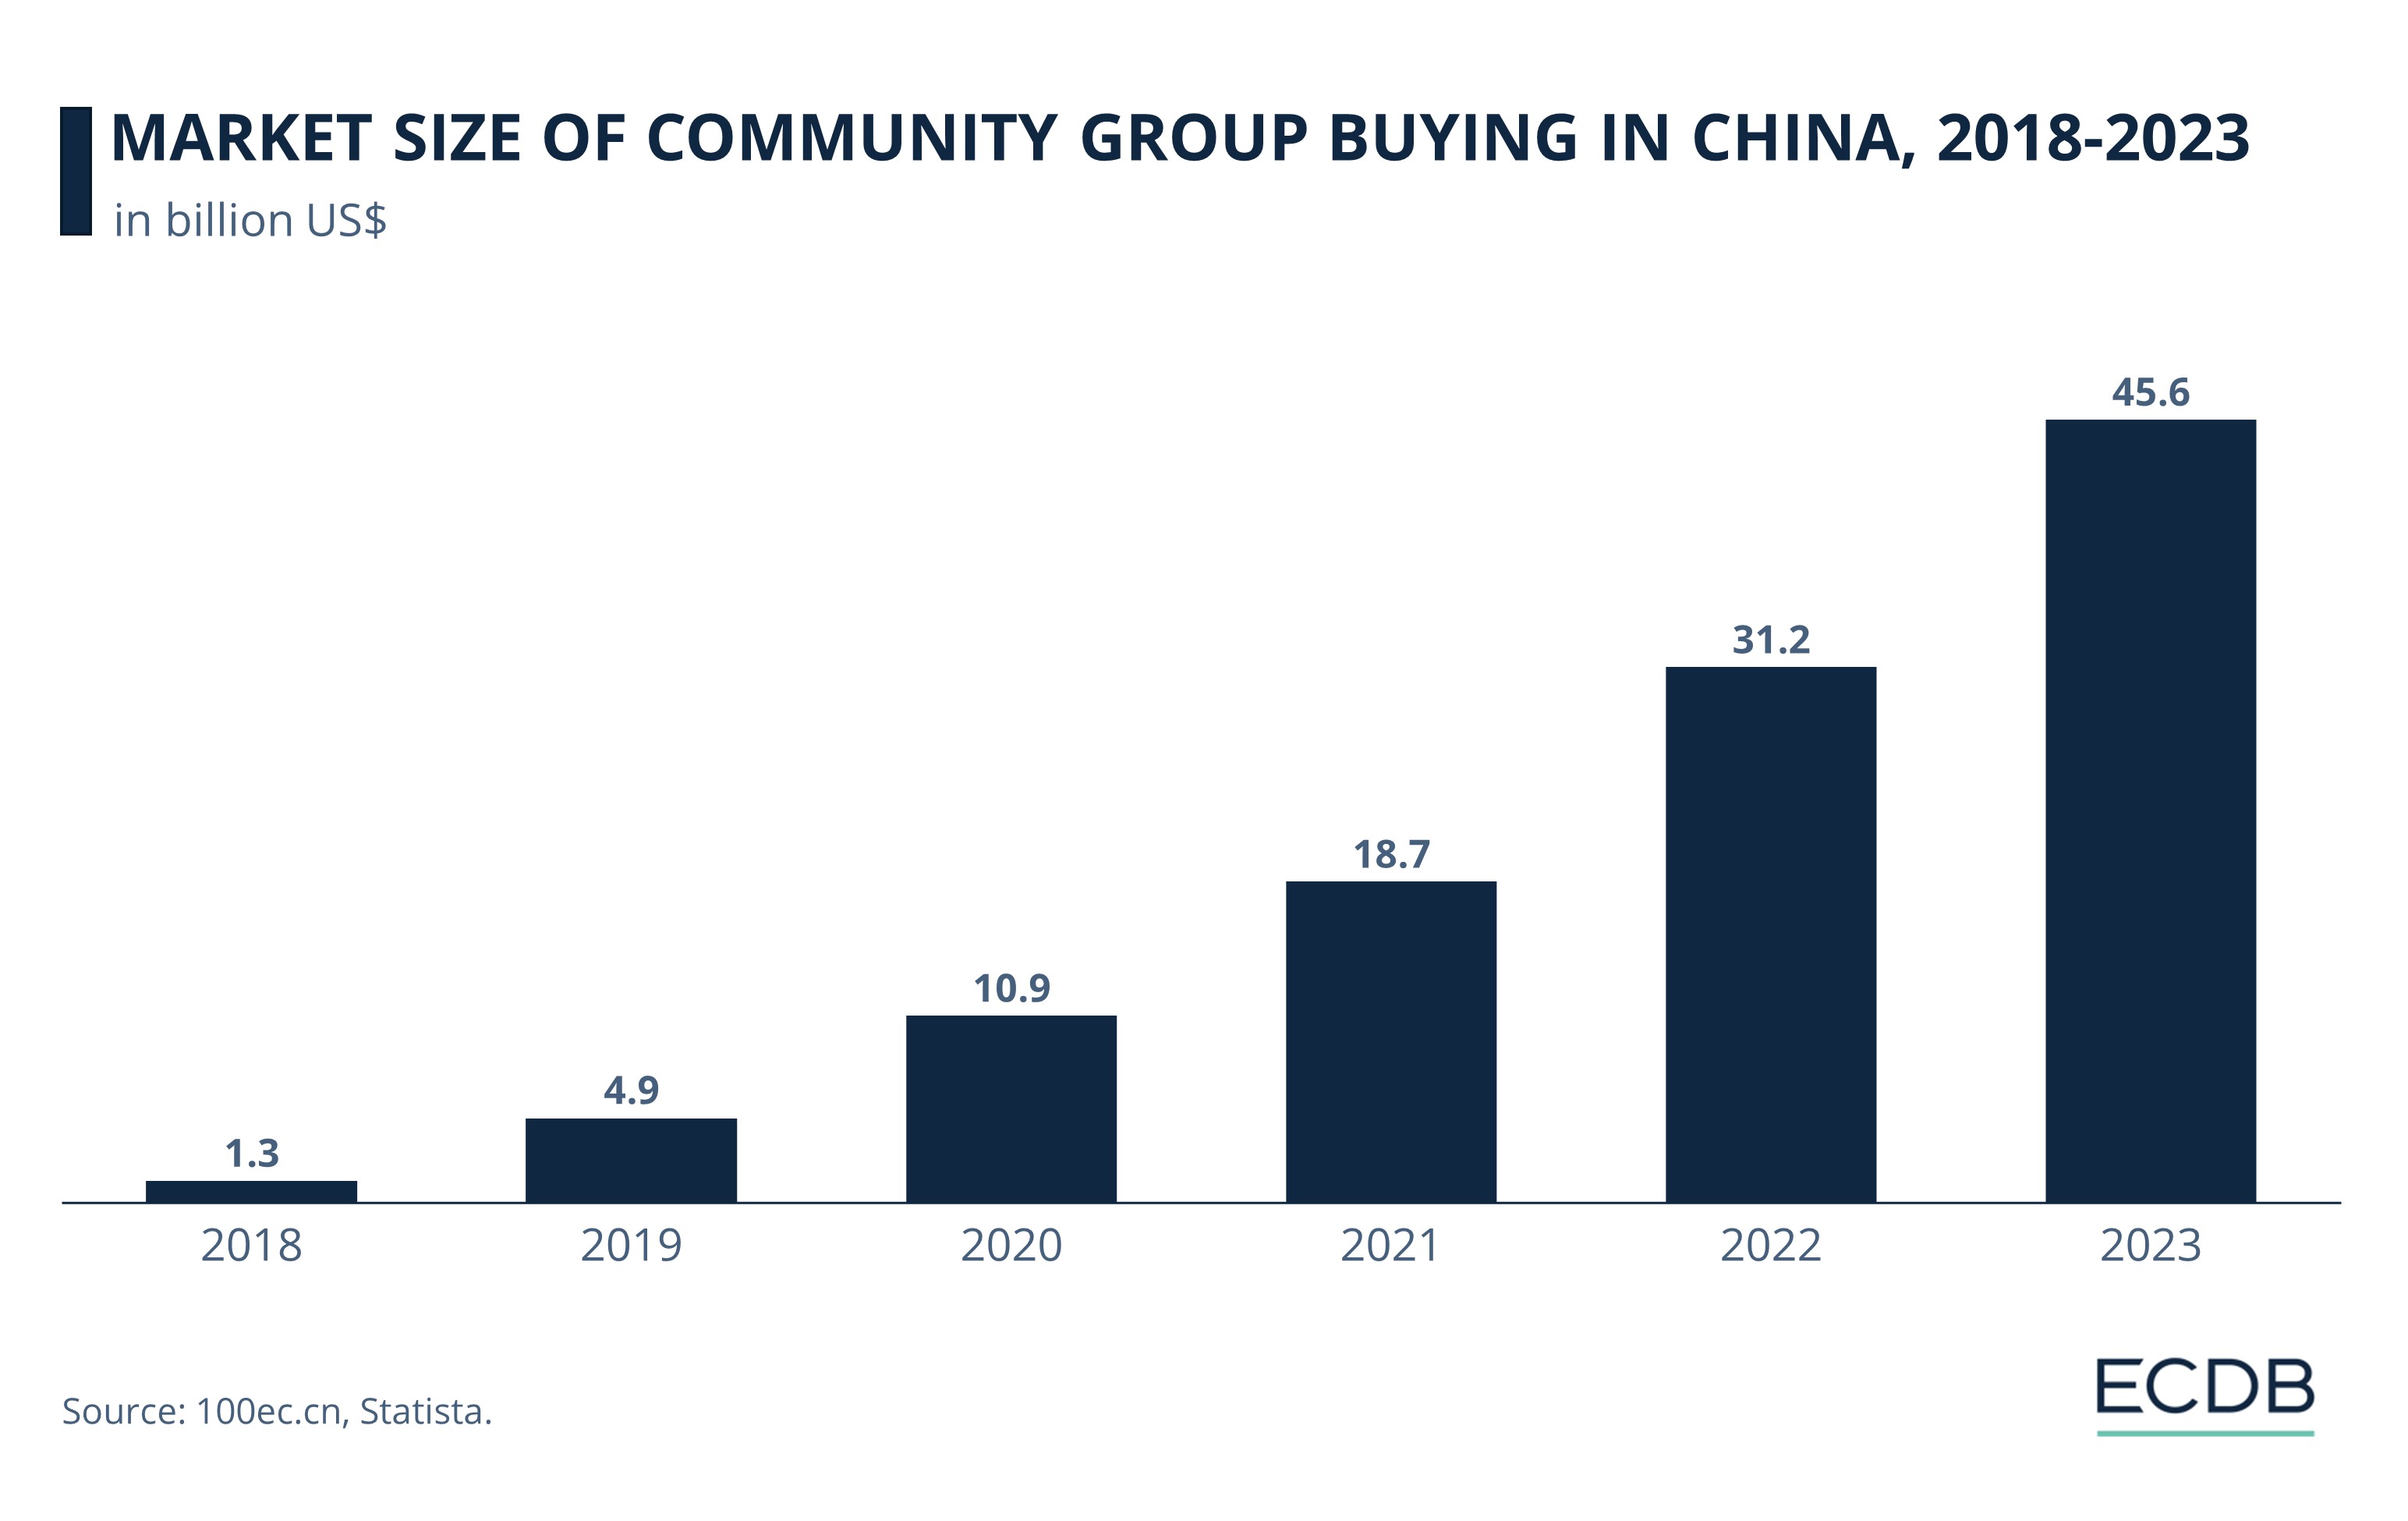 Market Size of Community Group Buying in China